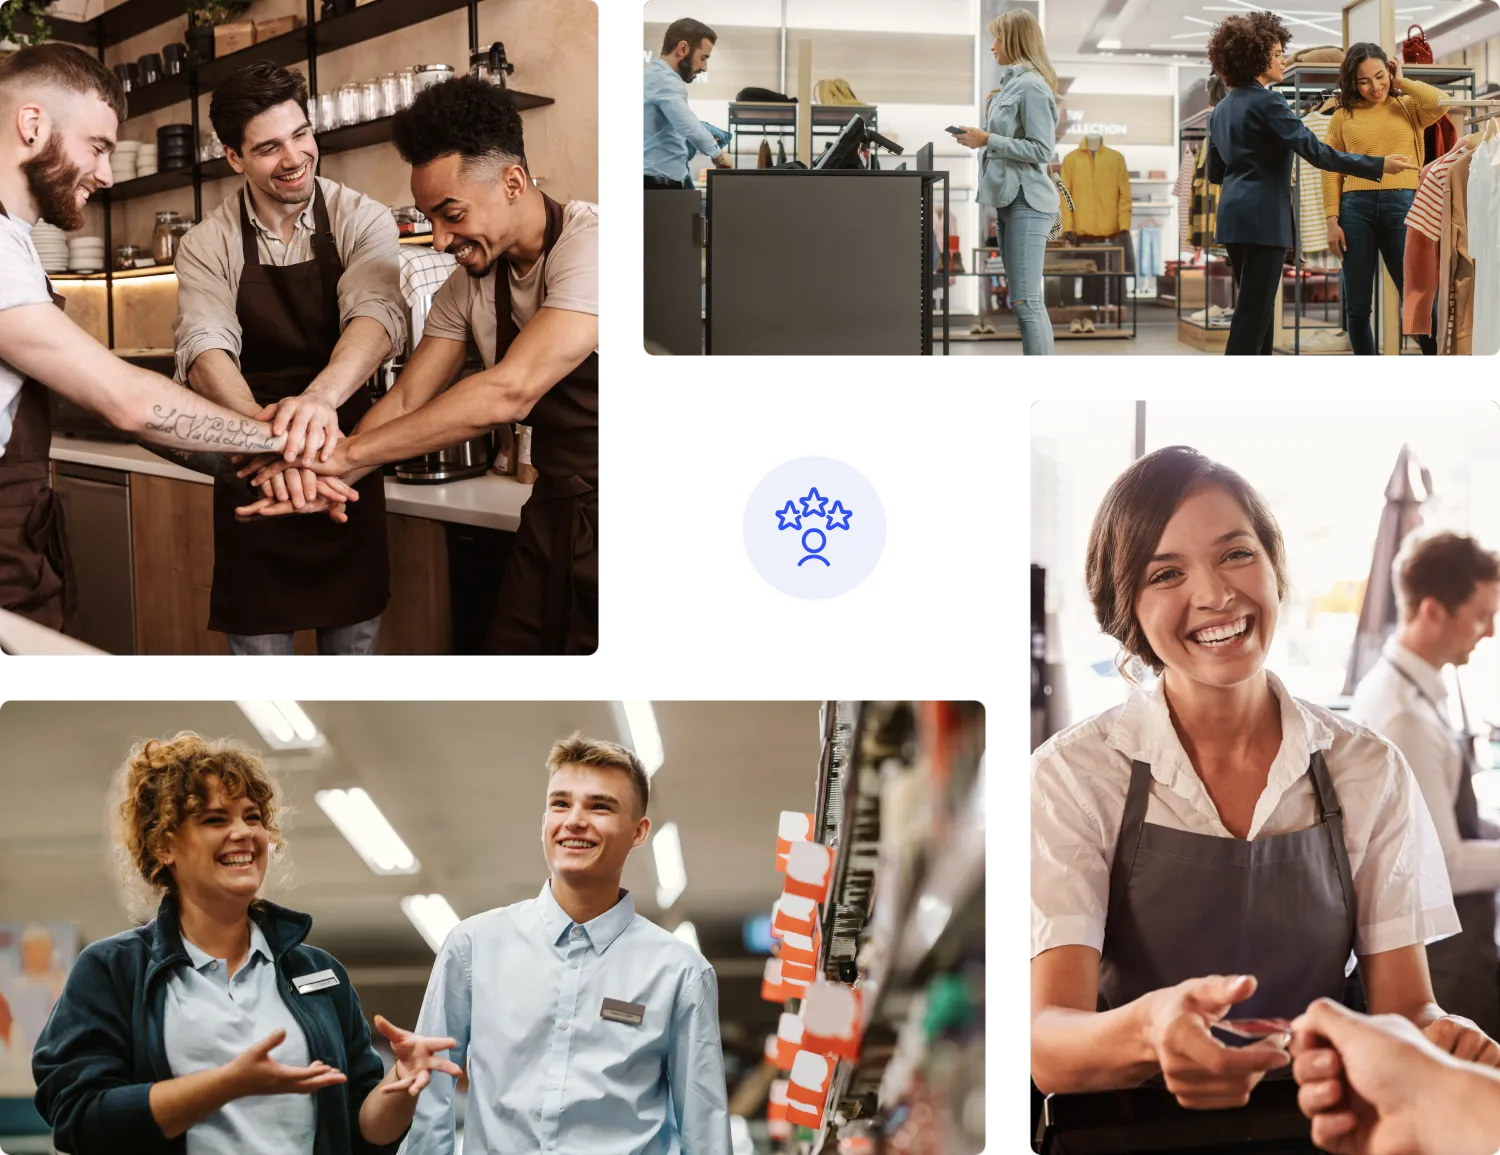 Happy employees in stores and cafes